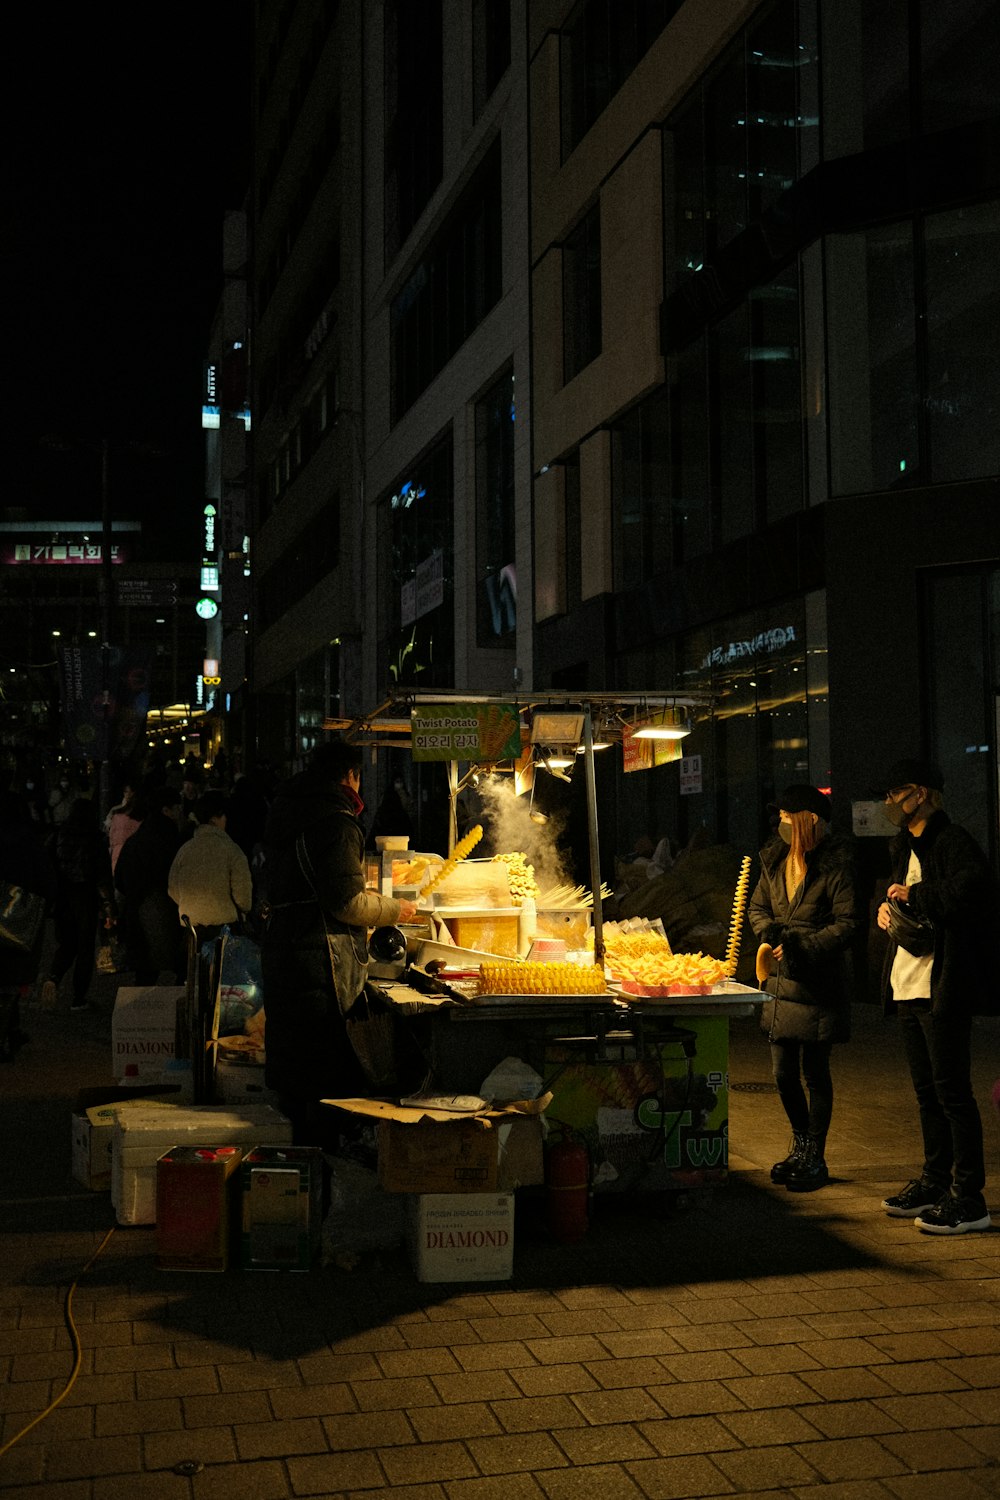 a man and a woman standing in front of a food stand at night